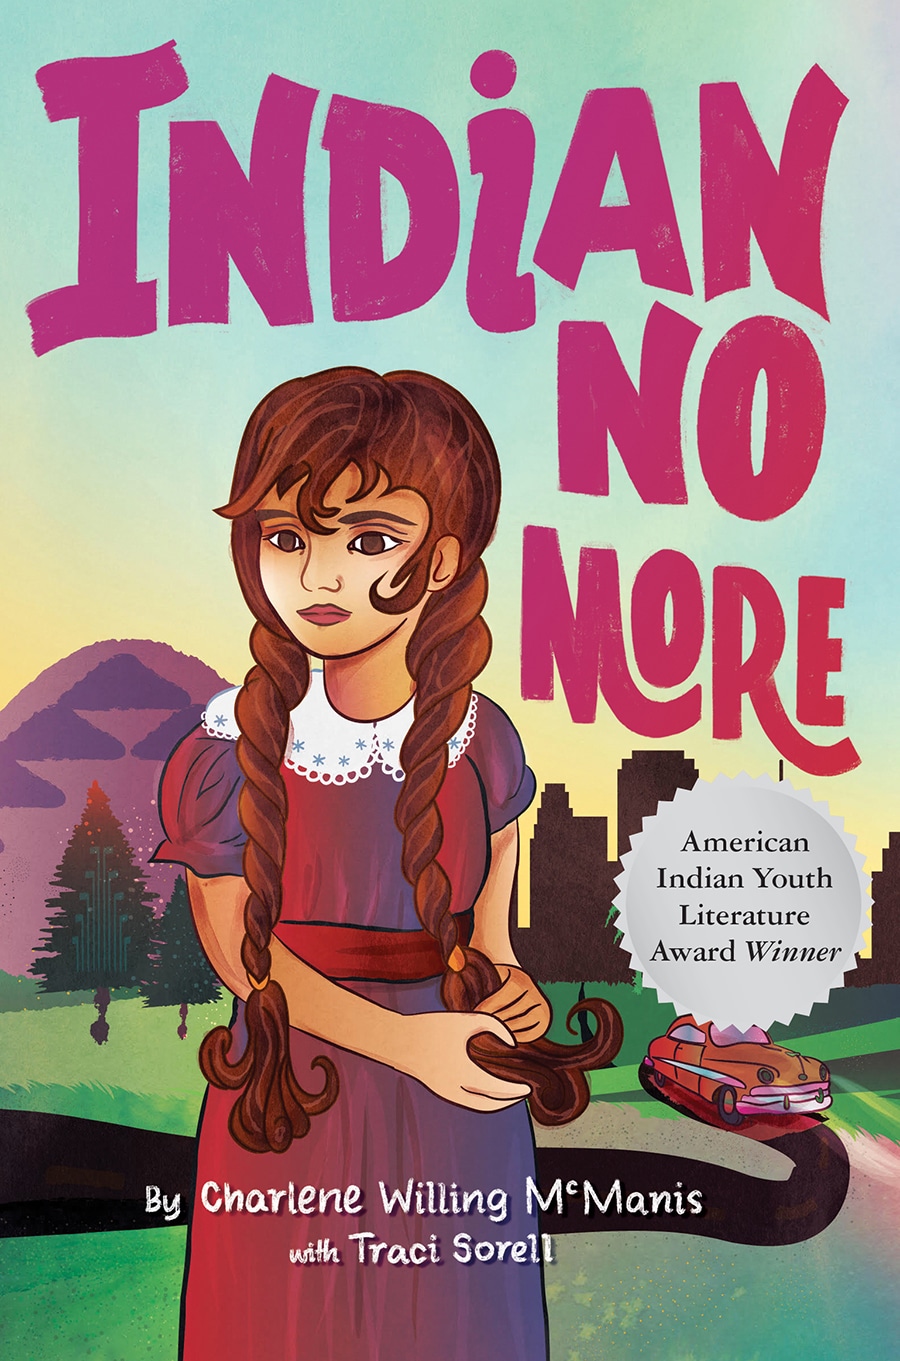 Regina, a Native girl, runs in the mountains on this book cover